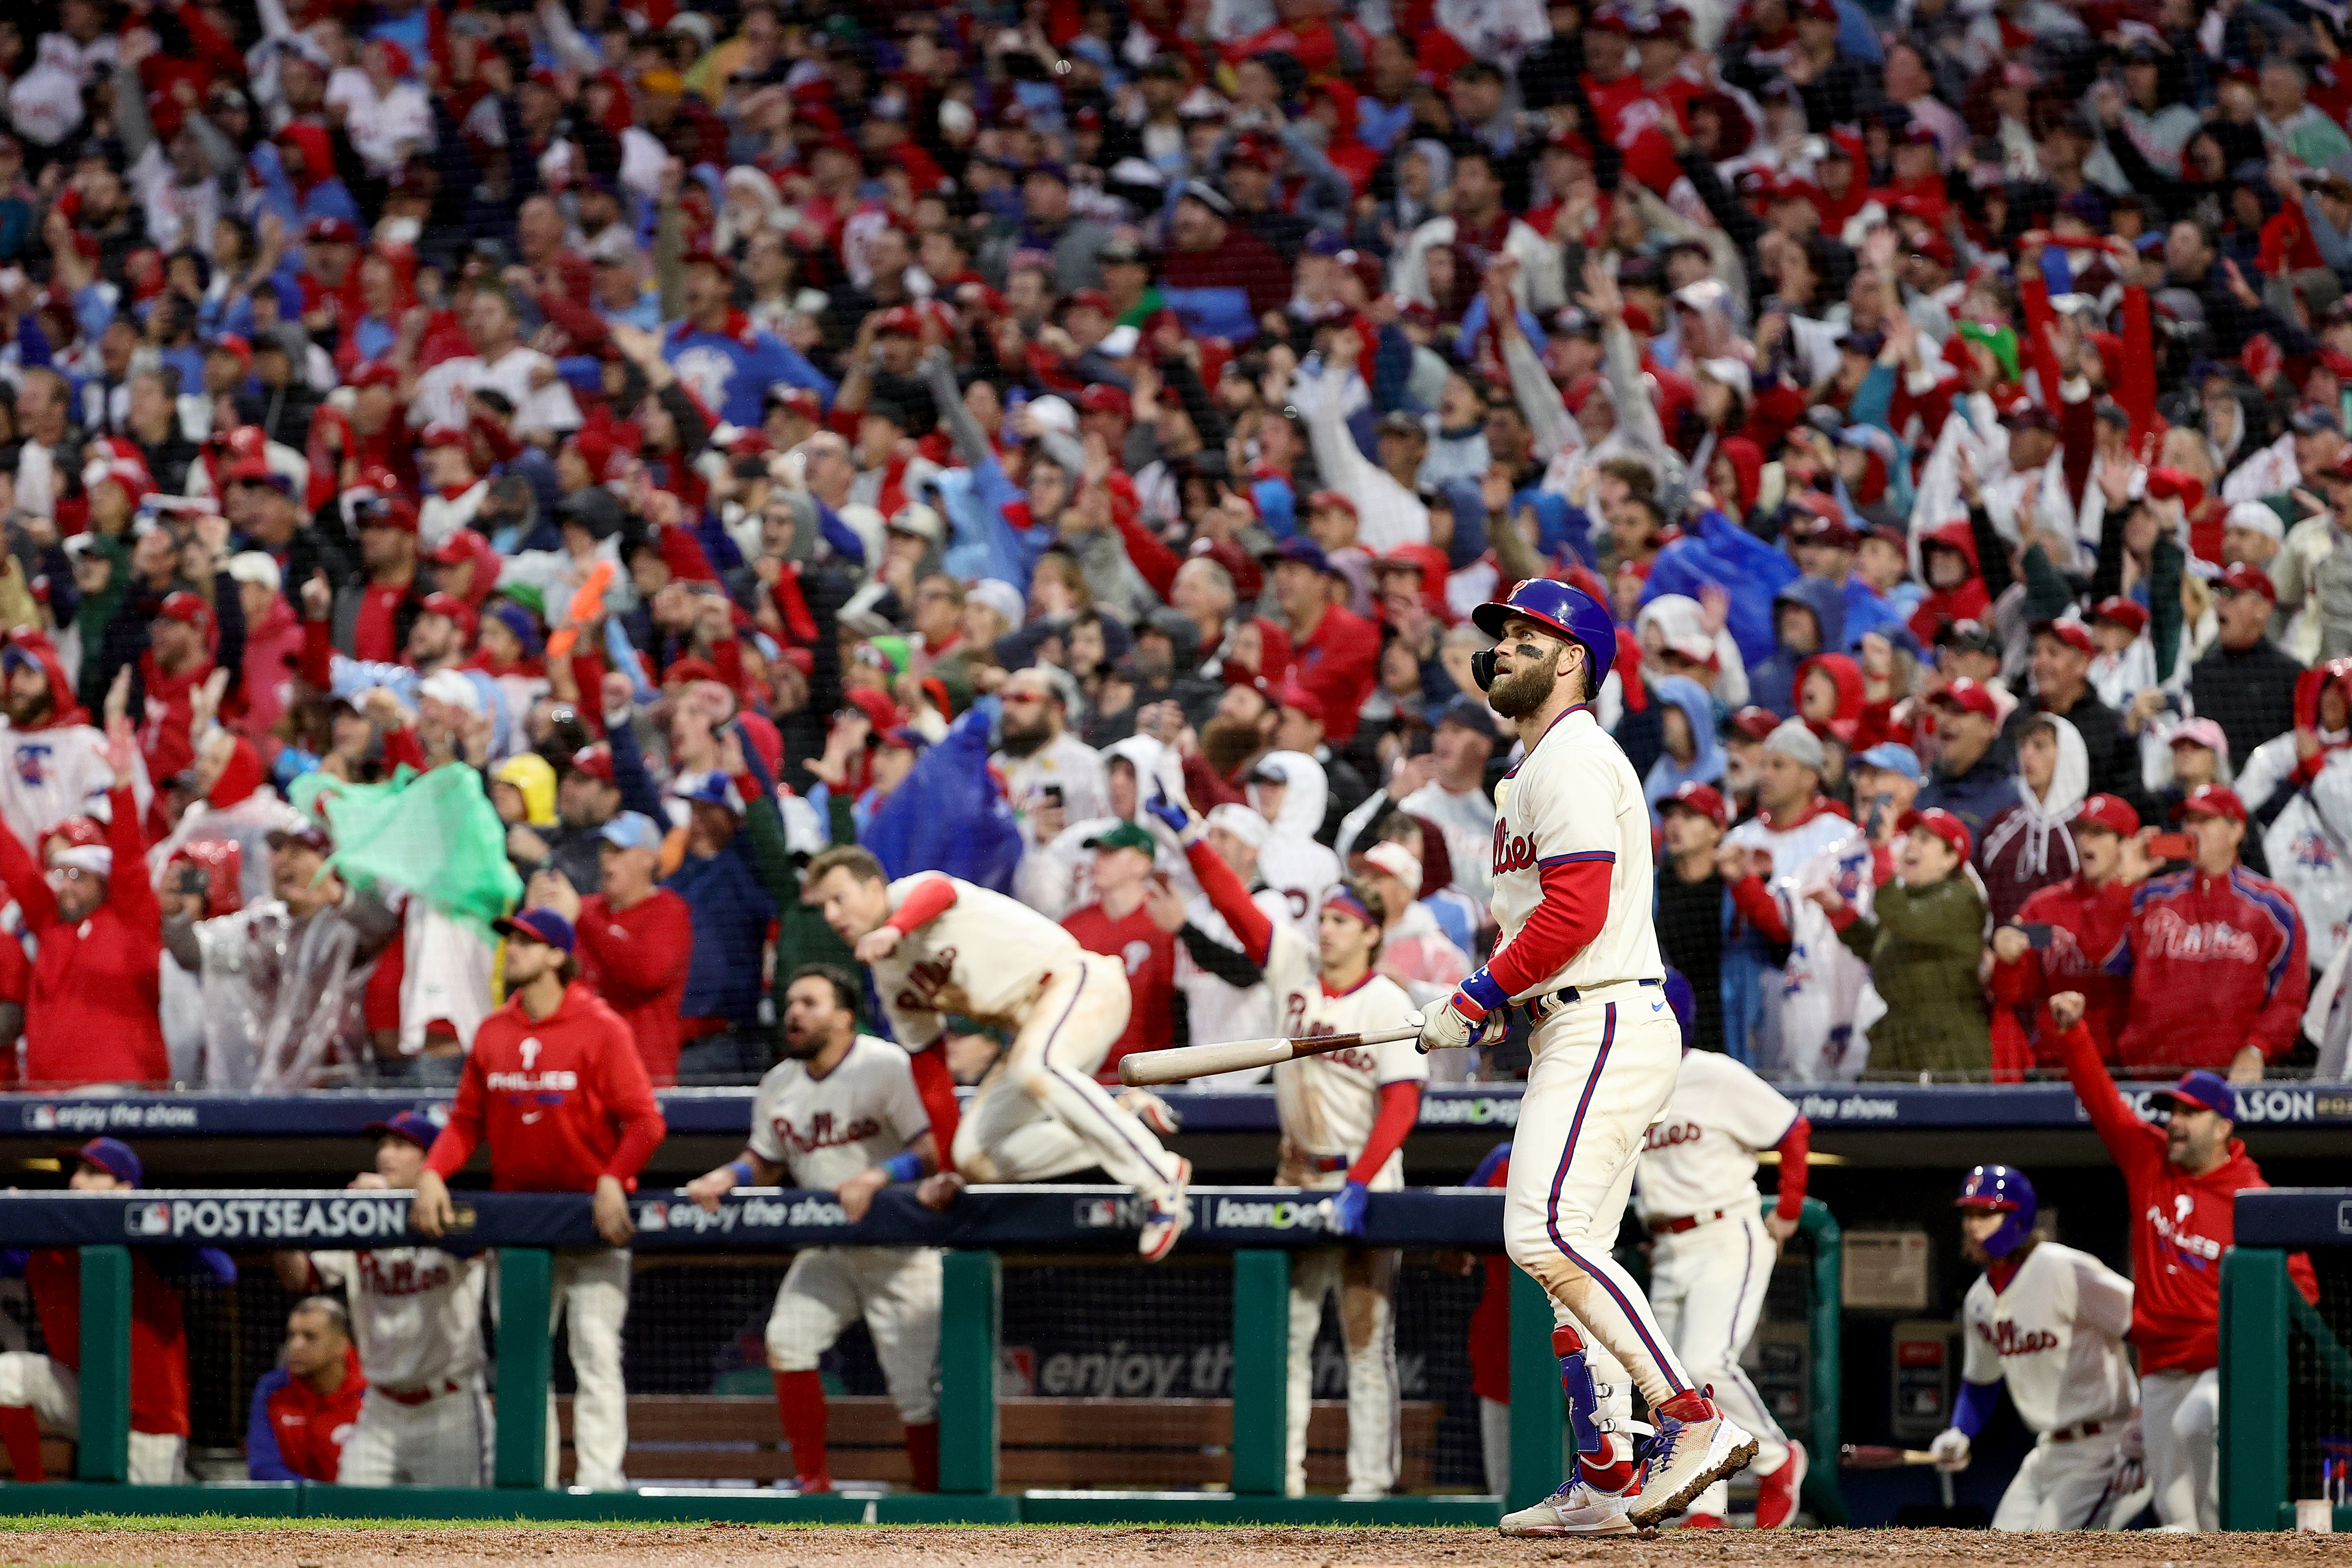 Phillies win the pennant! The Phillies incredible run continues! 